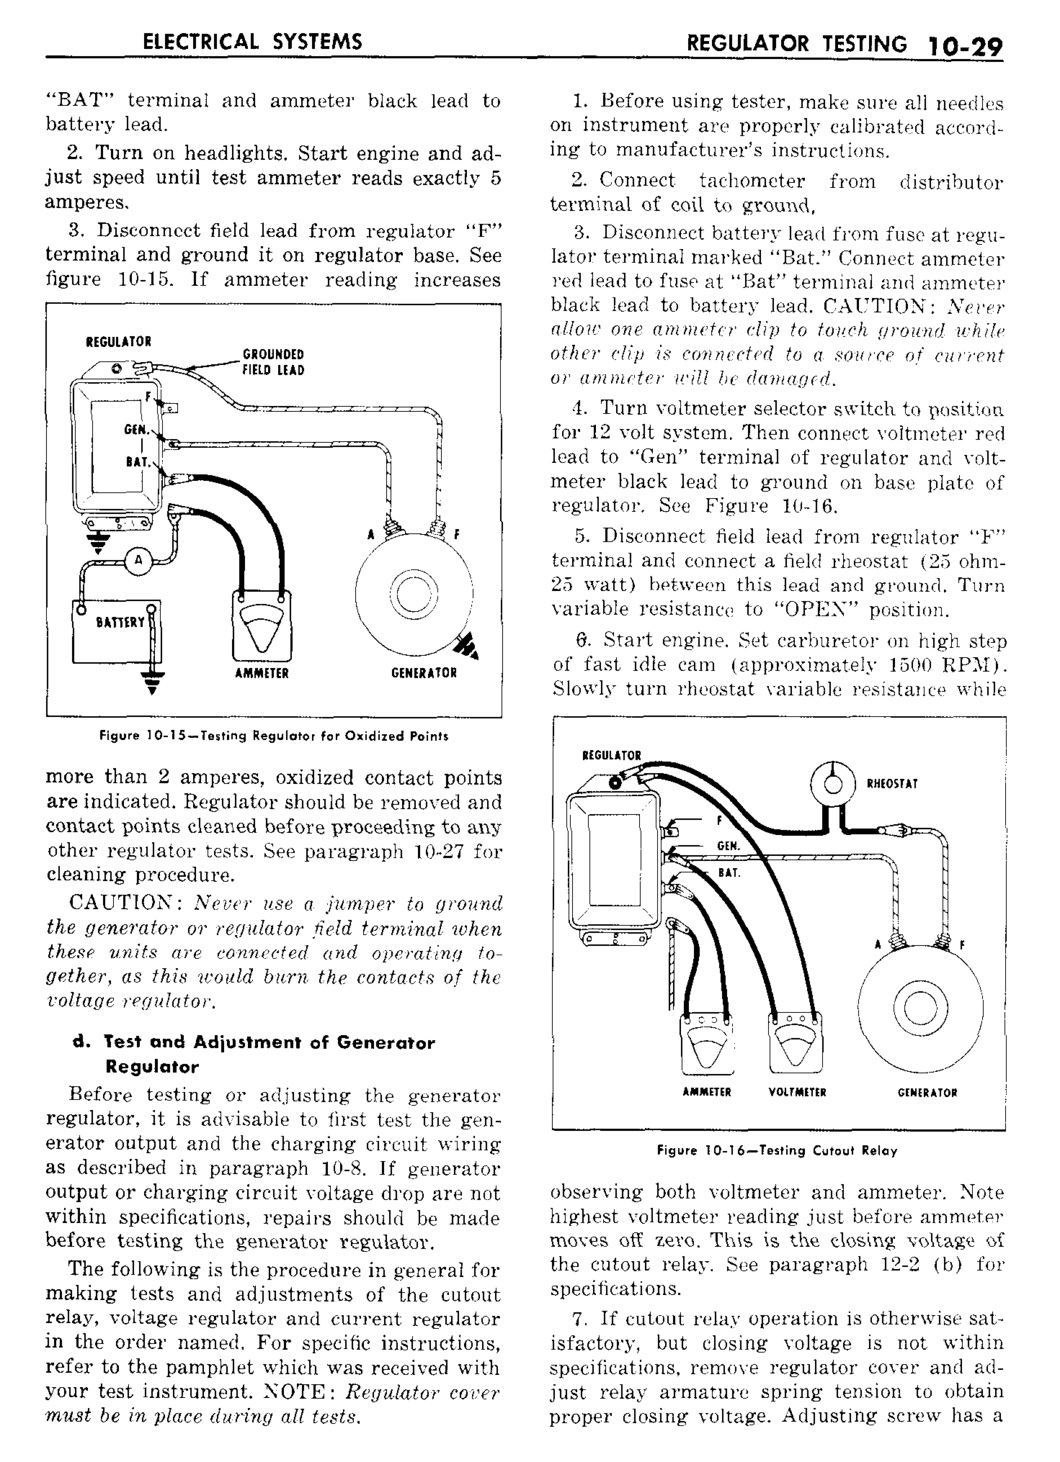 n_11 1959 Buick Shop Manual - Electrical Systems-029-029.jpg